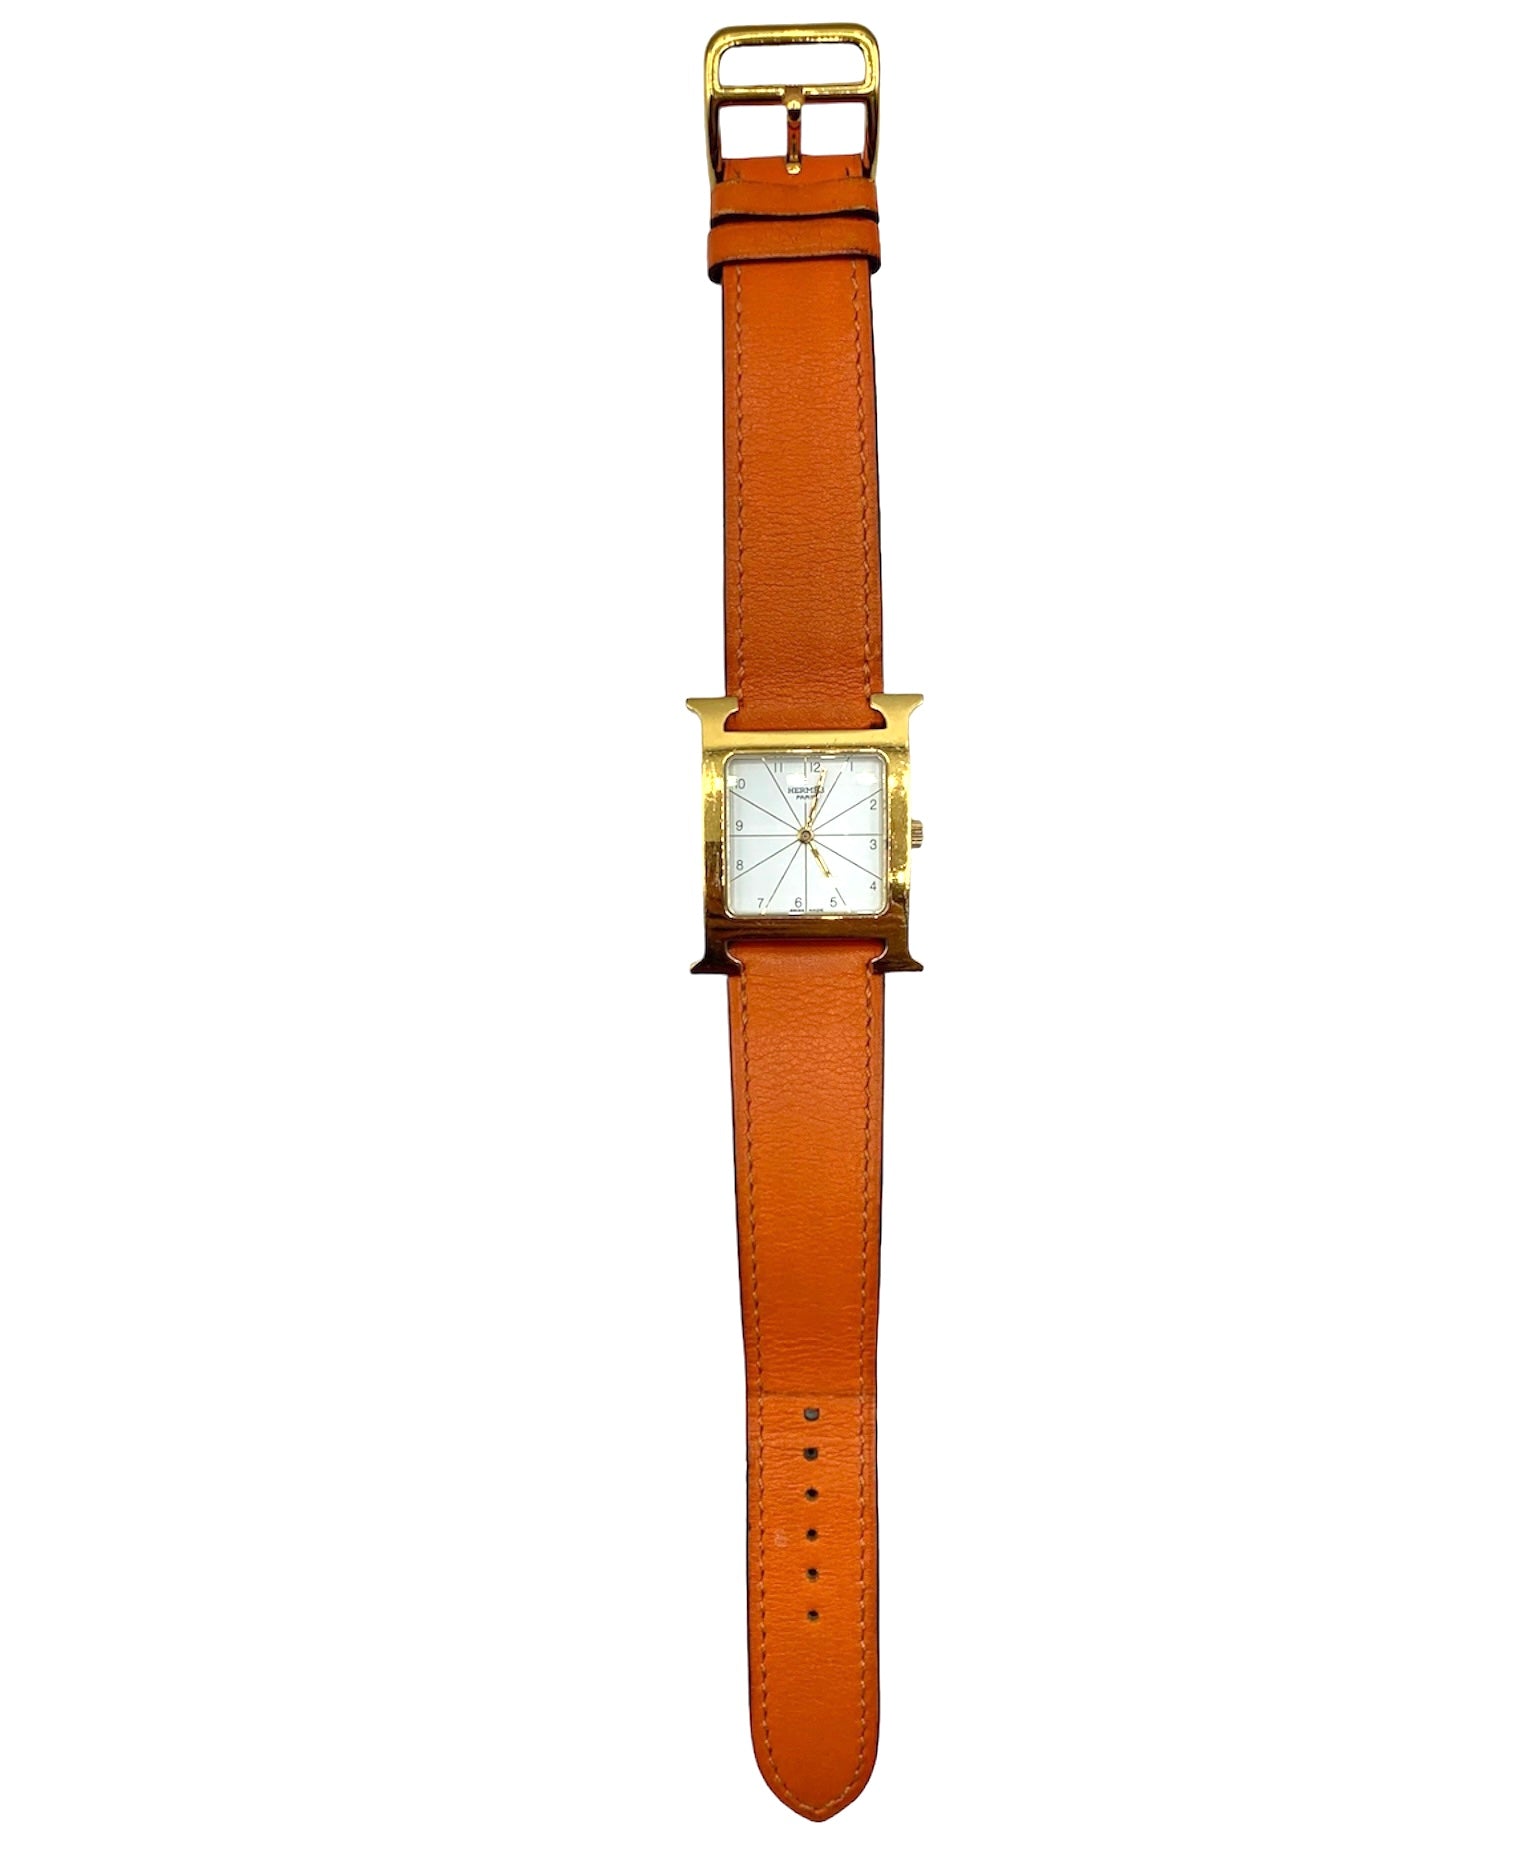 Classic Contemporary Hermes Logo Watch with Interchangable Red Band FRONT 2 of 7